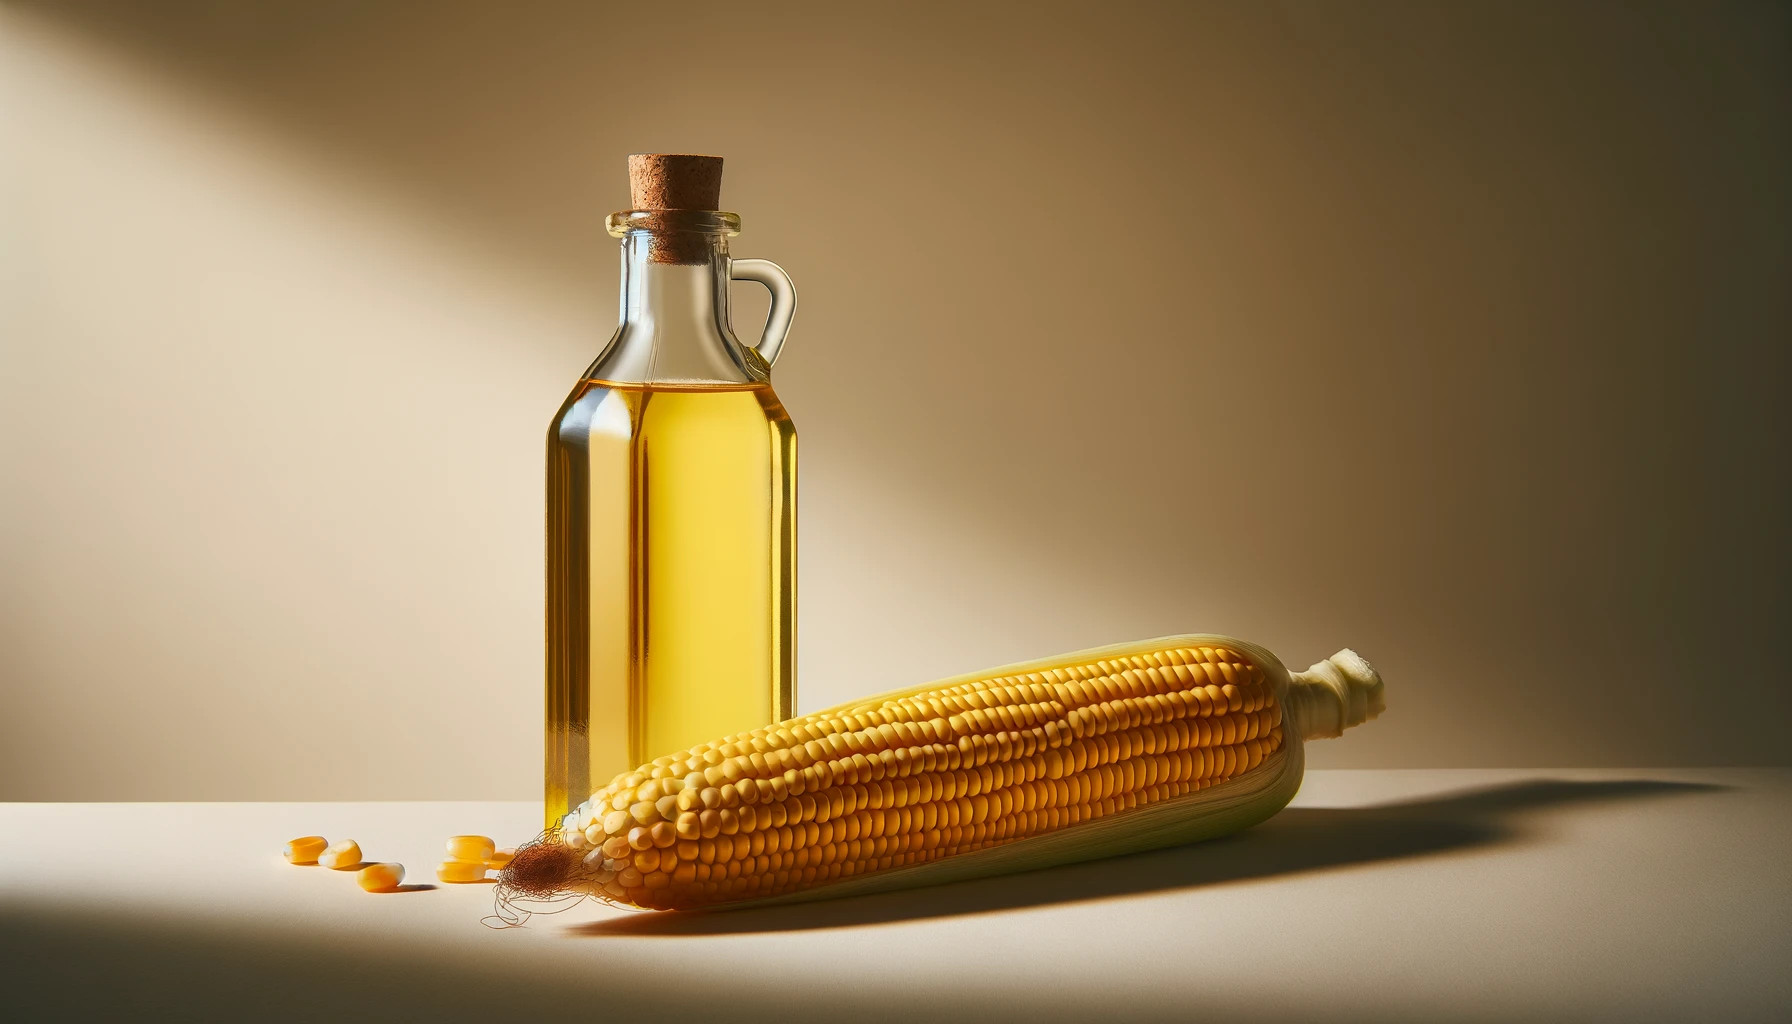 A minimalist photo of corn oil and whole corn side by side, illustrating good fats in corn products.